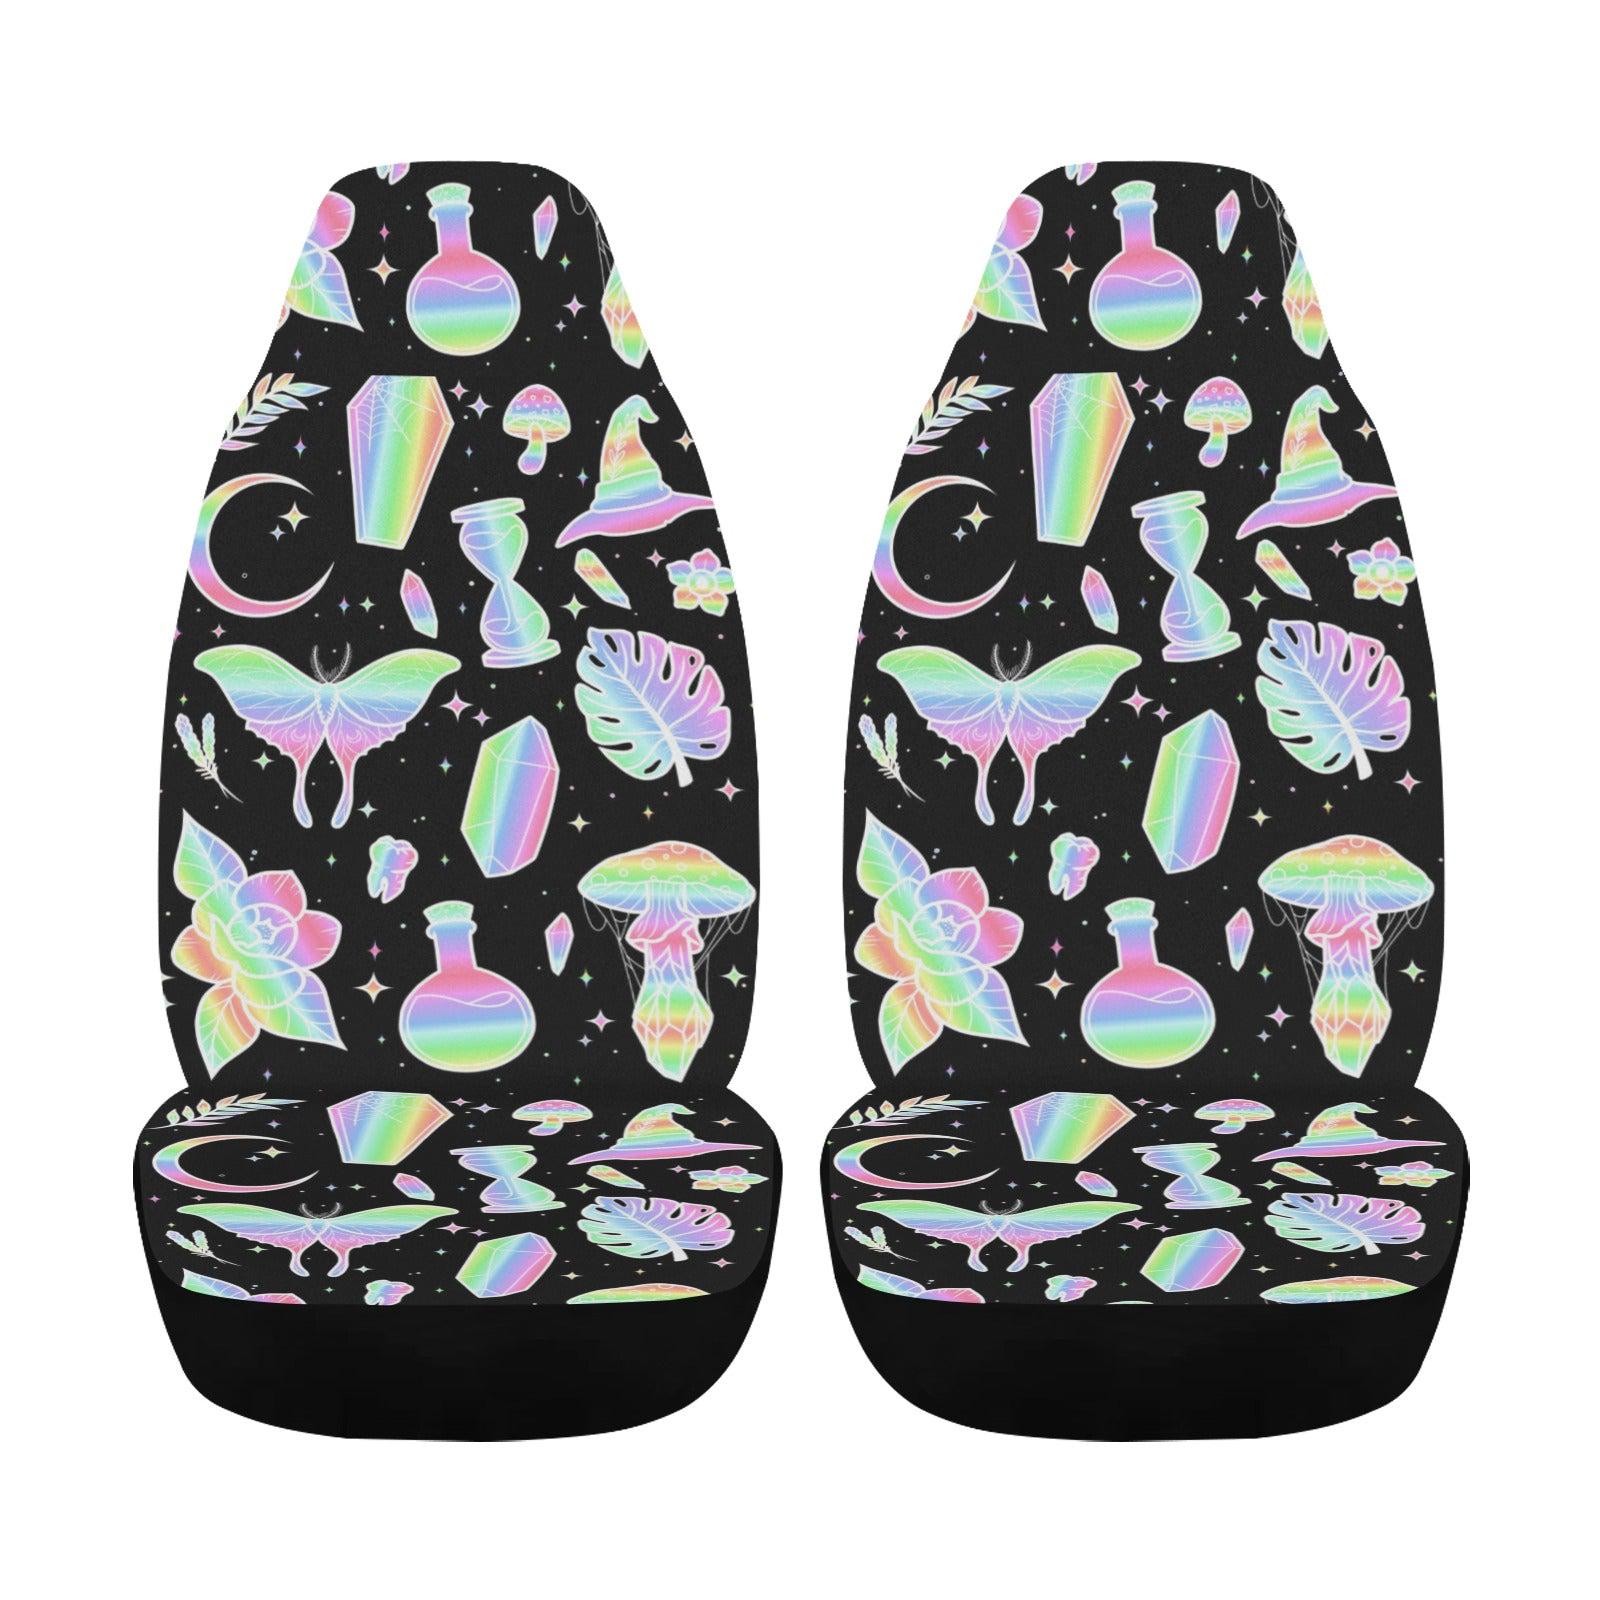 Magic things Witchy Car Seat Covers-MoonChildWorld